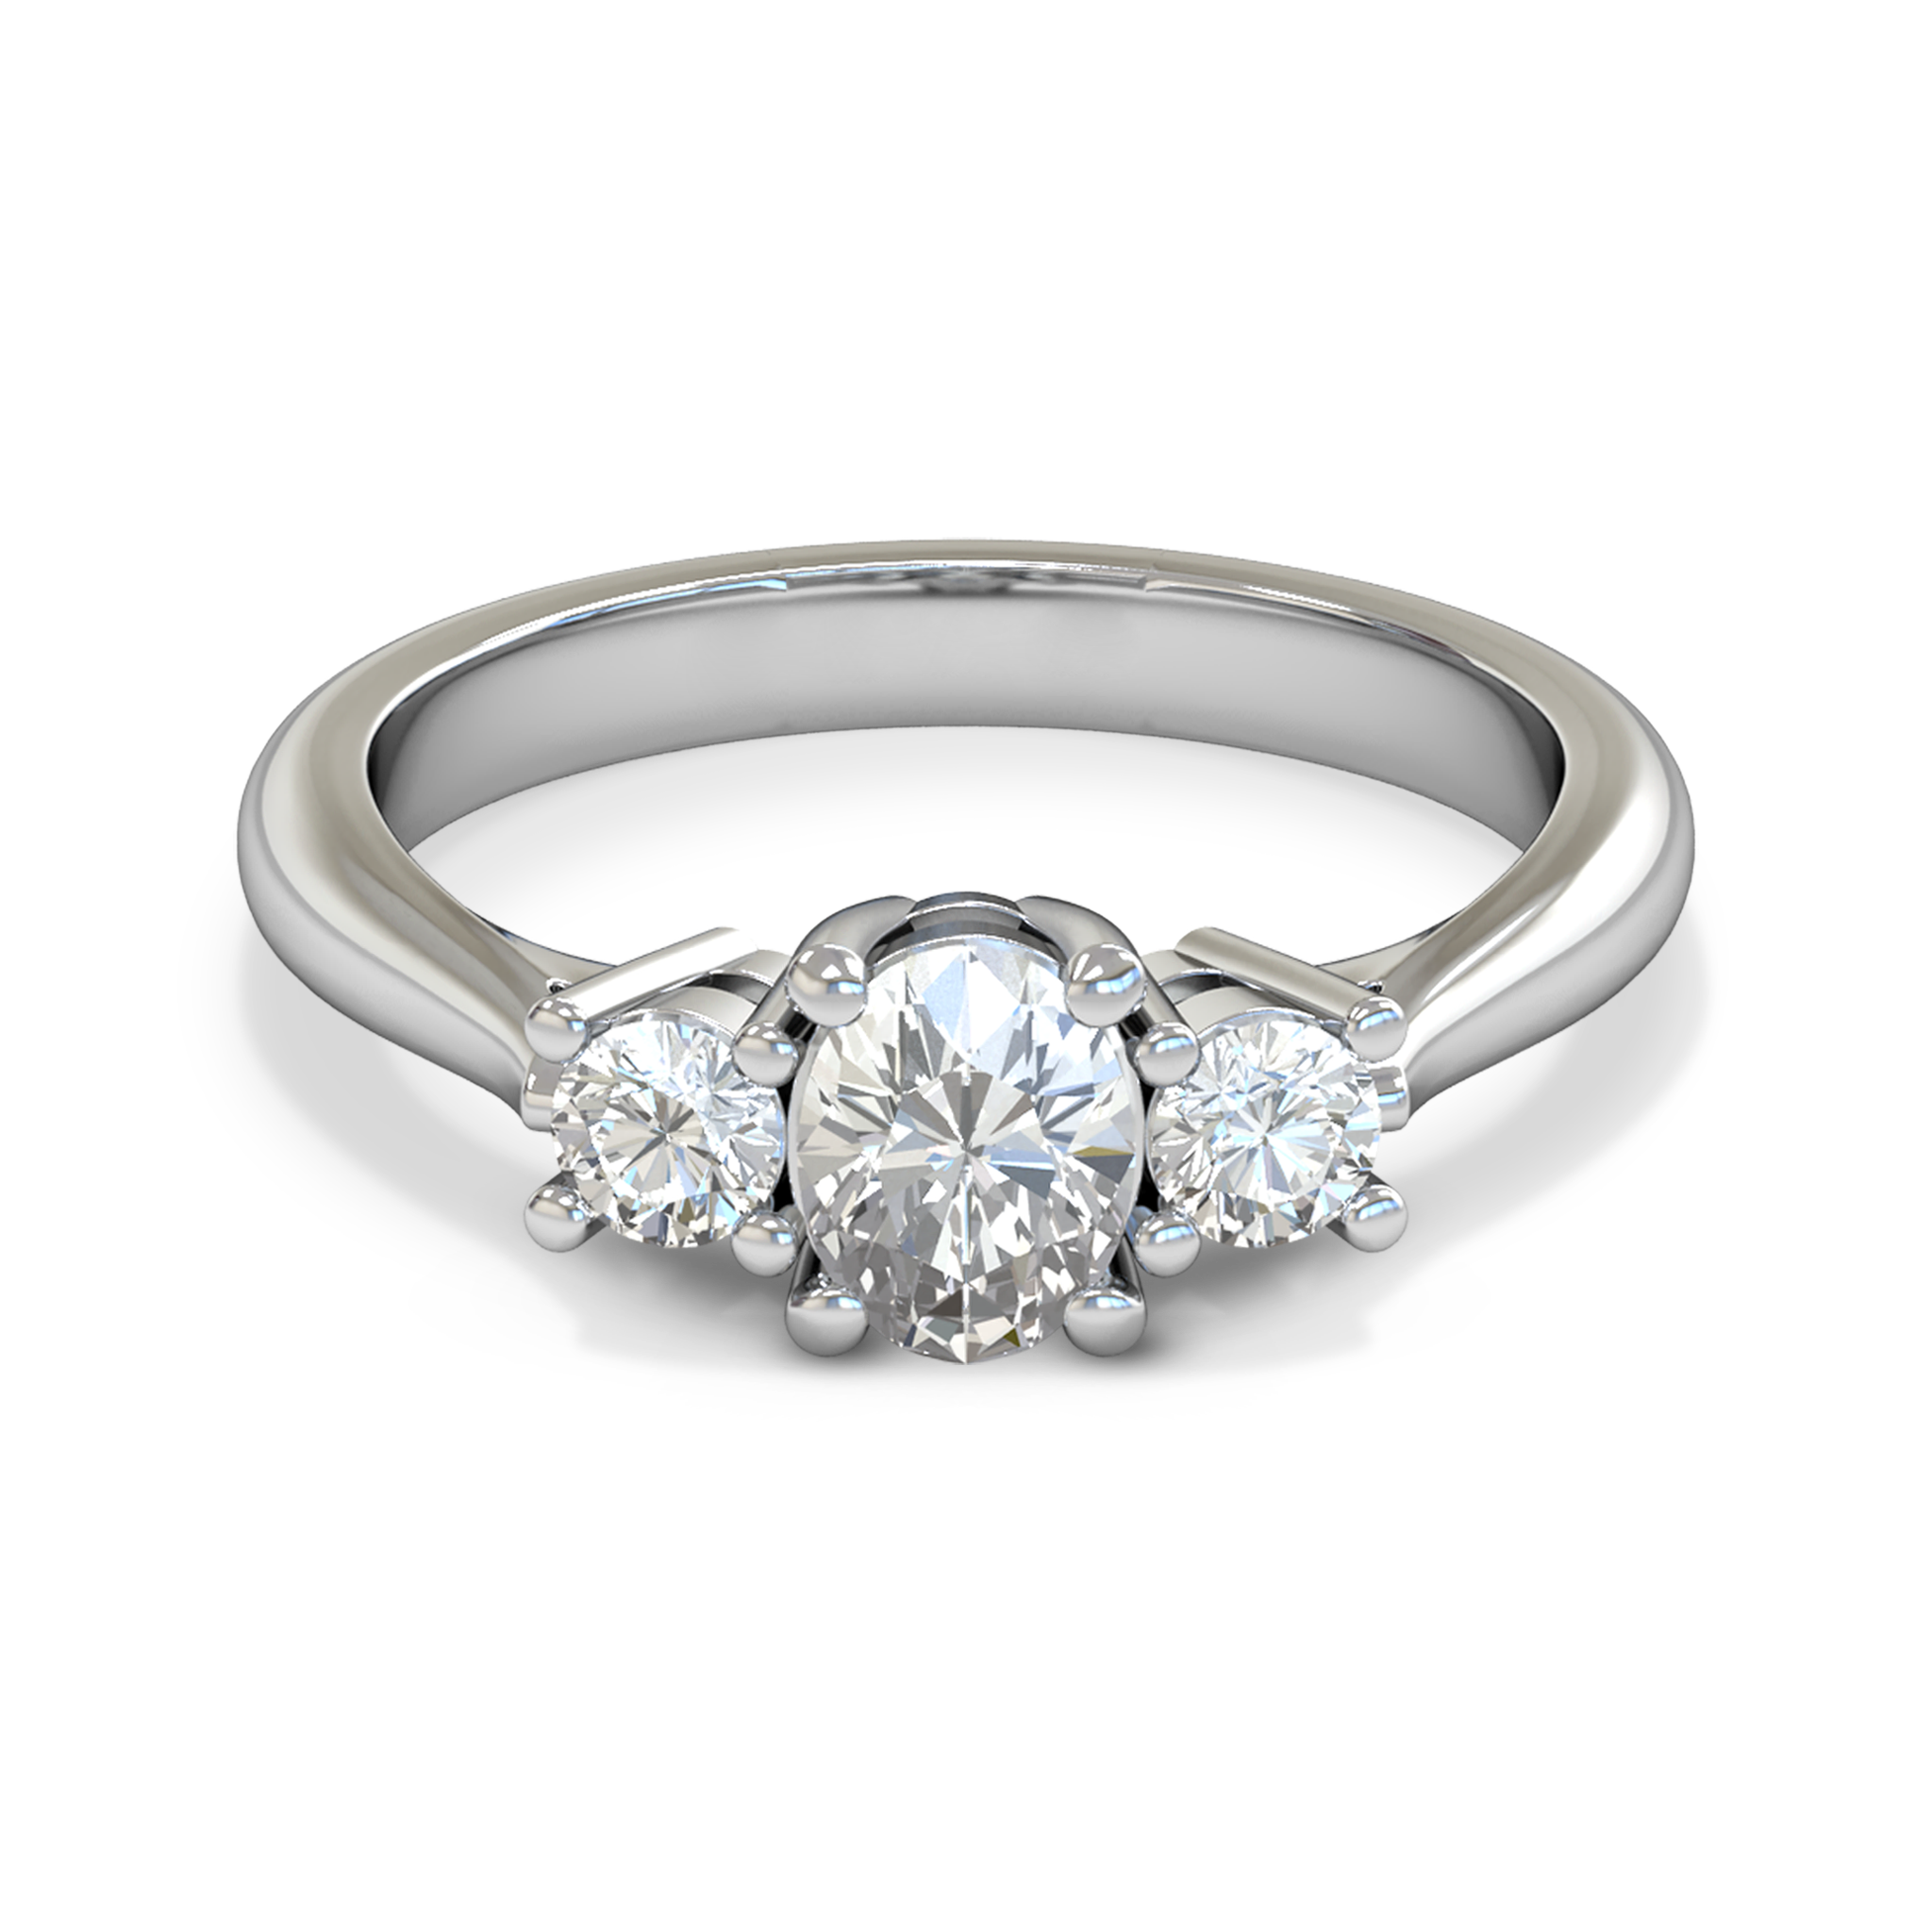 Trilogy Oval Diamond Fairtrade Gold Engagement Ring in 18K White Fairtrade Gold